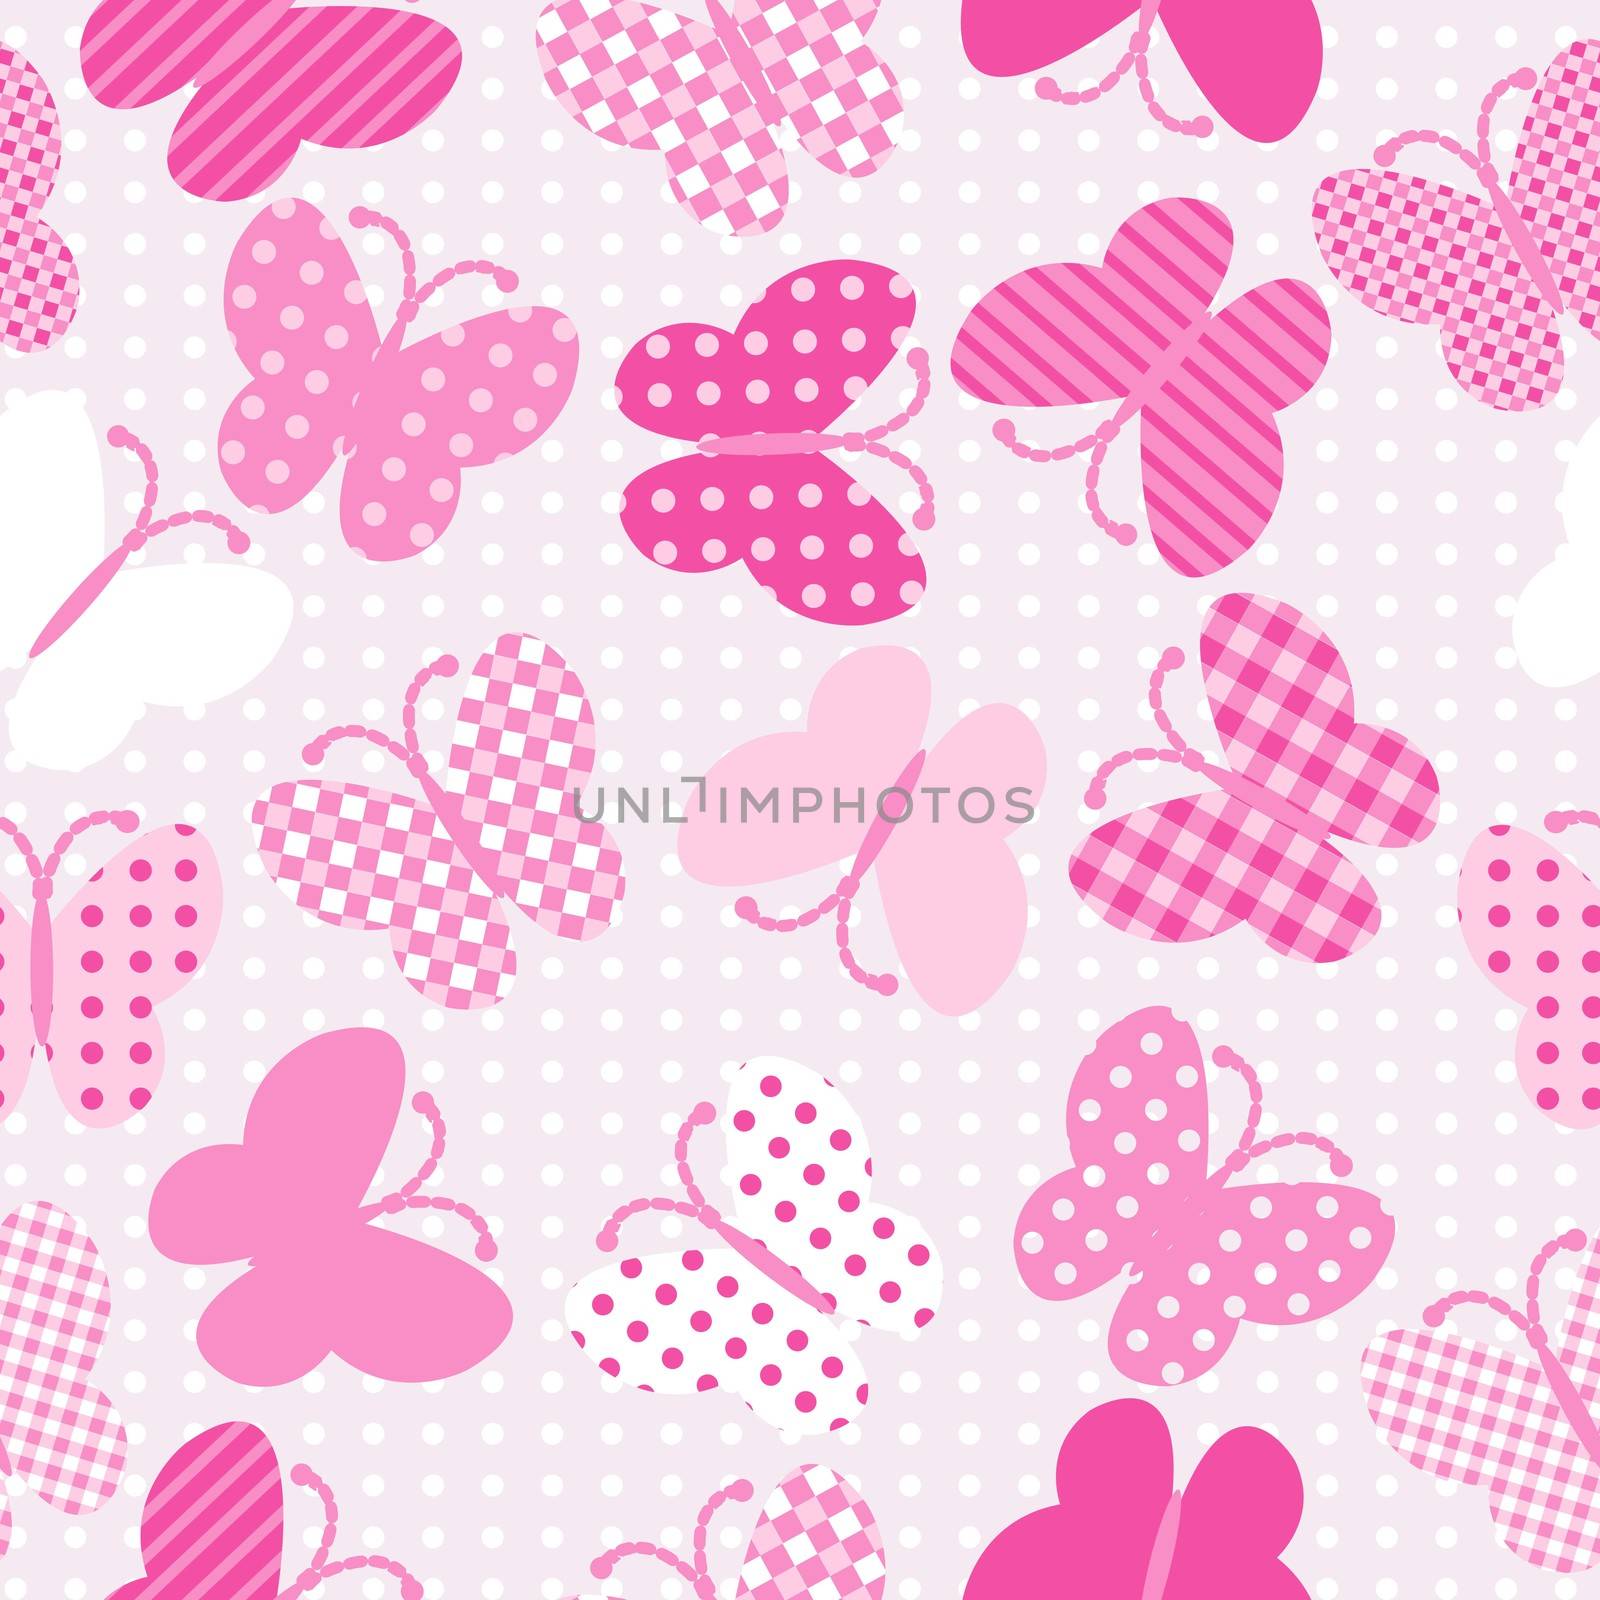 Pink patterned butterflies seamless by hibrida13